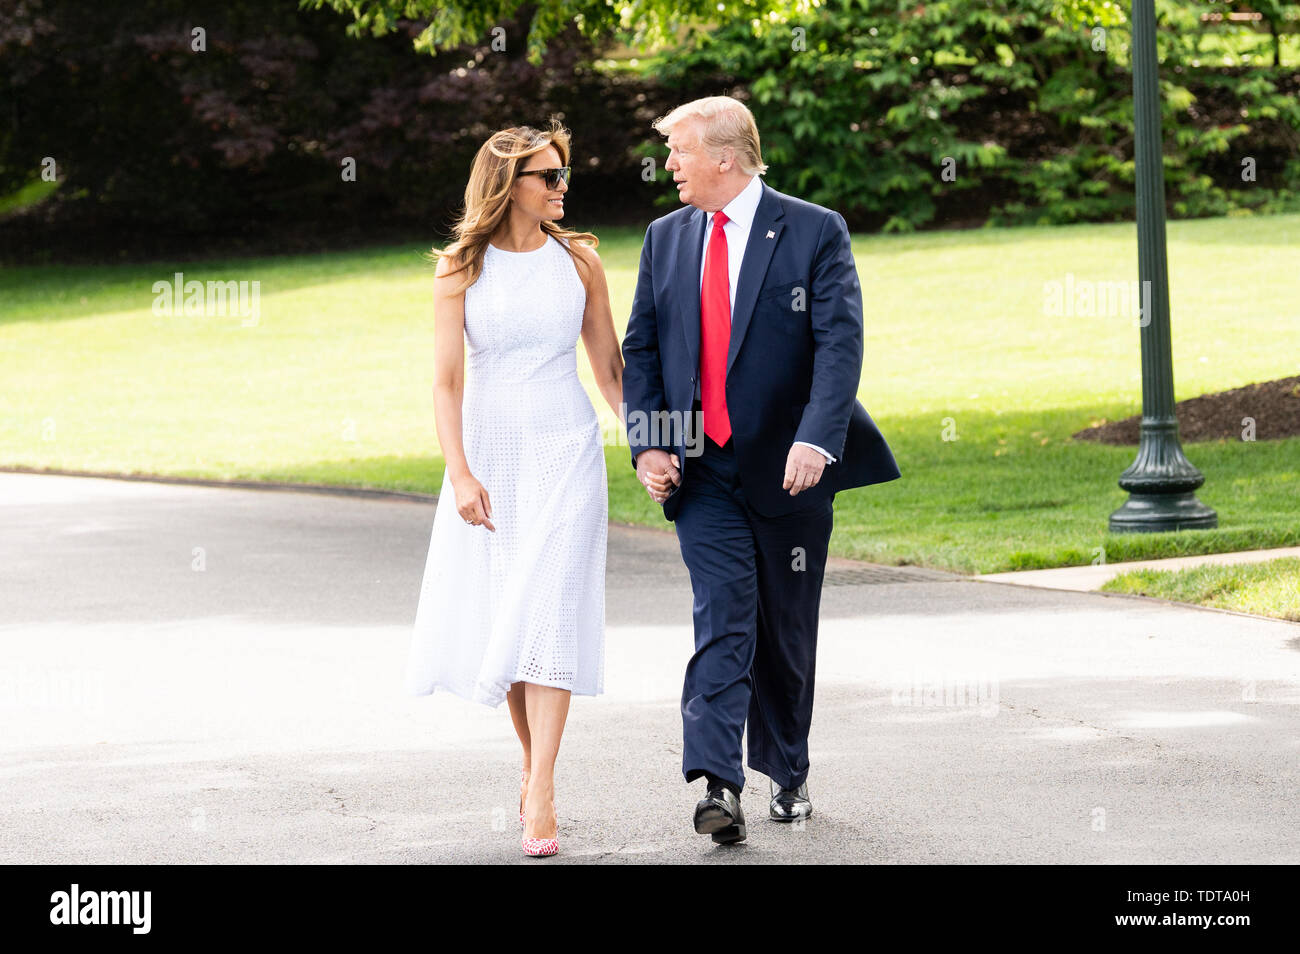 President Donald Trump walking with First Lady Melania Trump near the White  House South Lawn just prior to getting on Marine One, to start a trip to  Florida where he is to